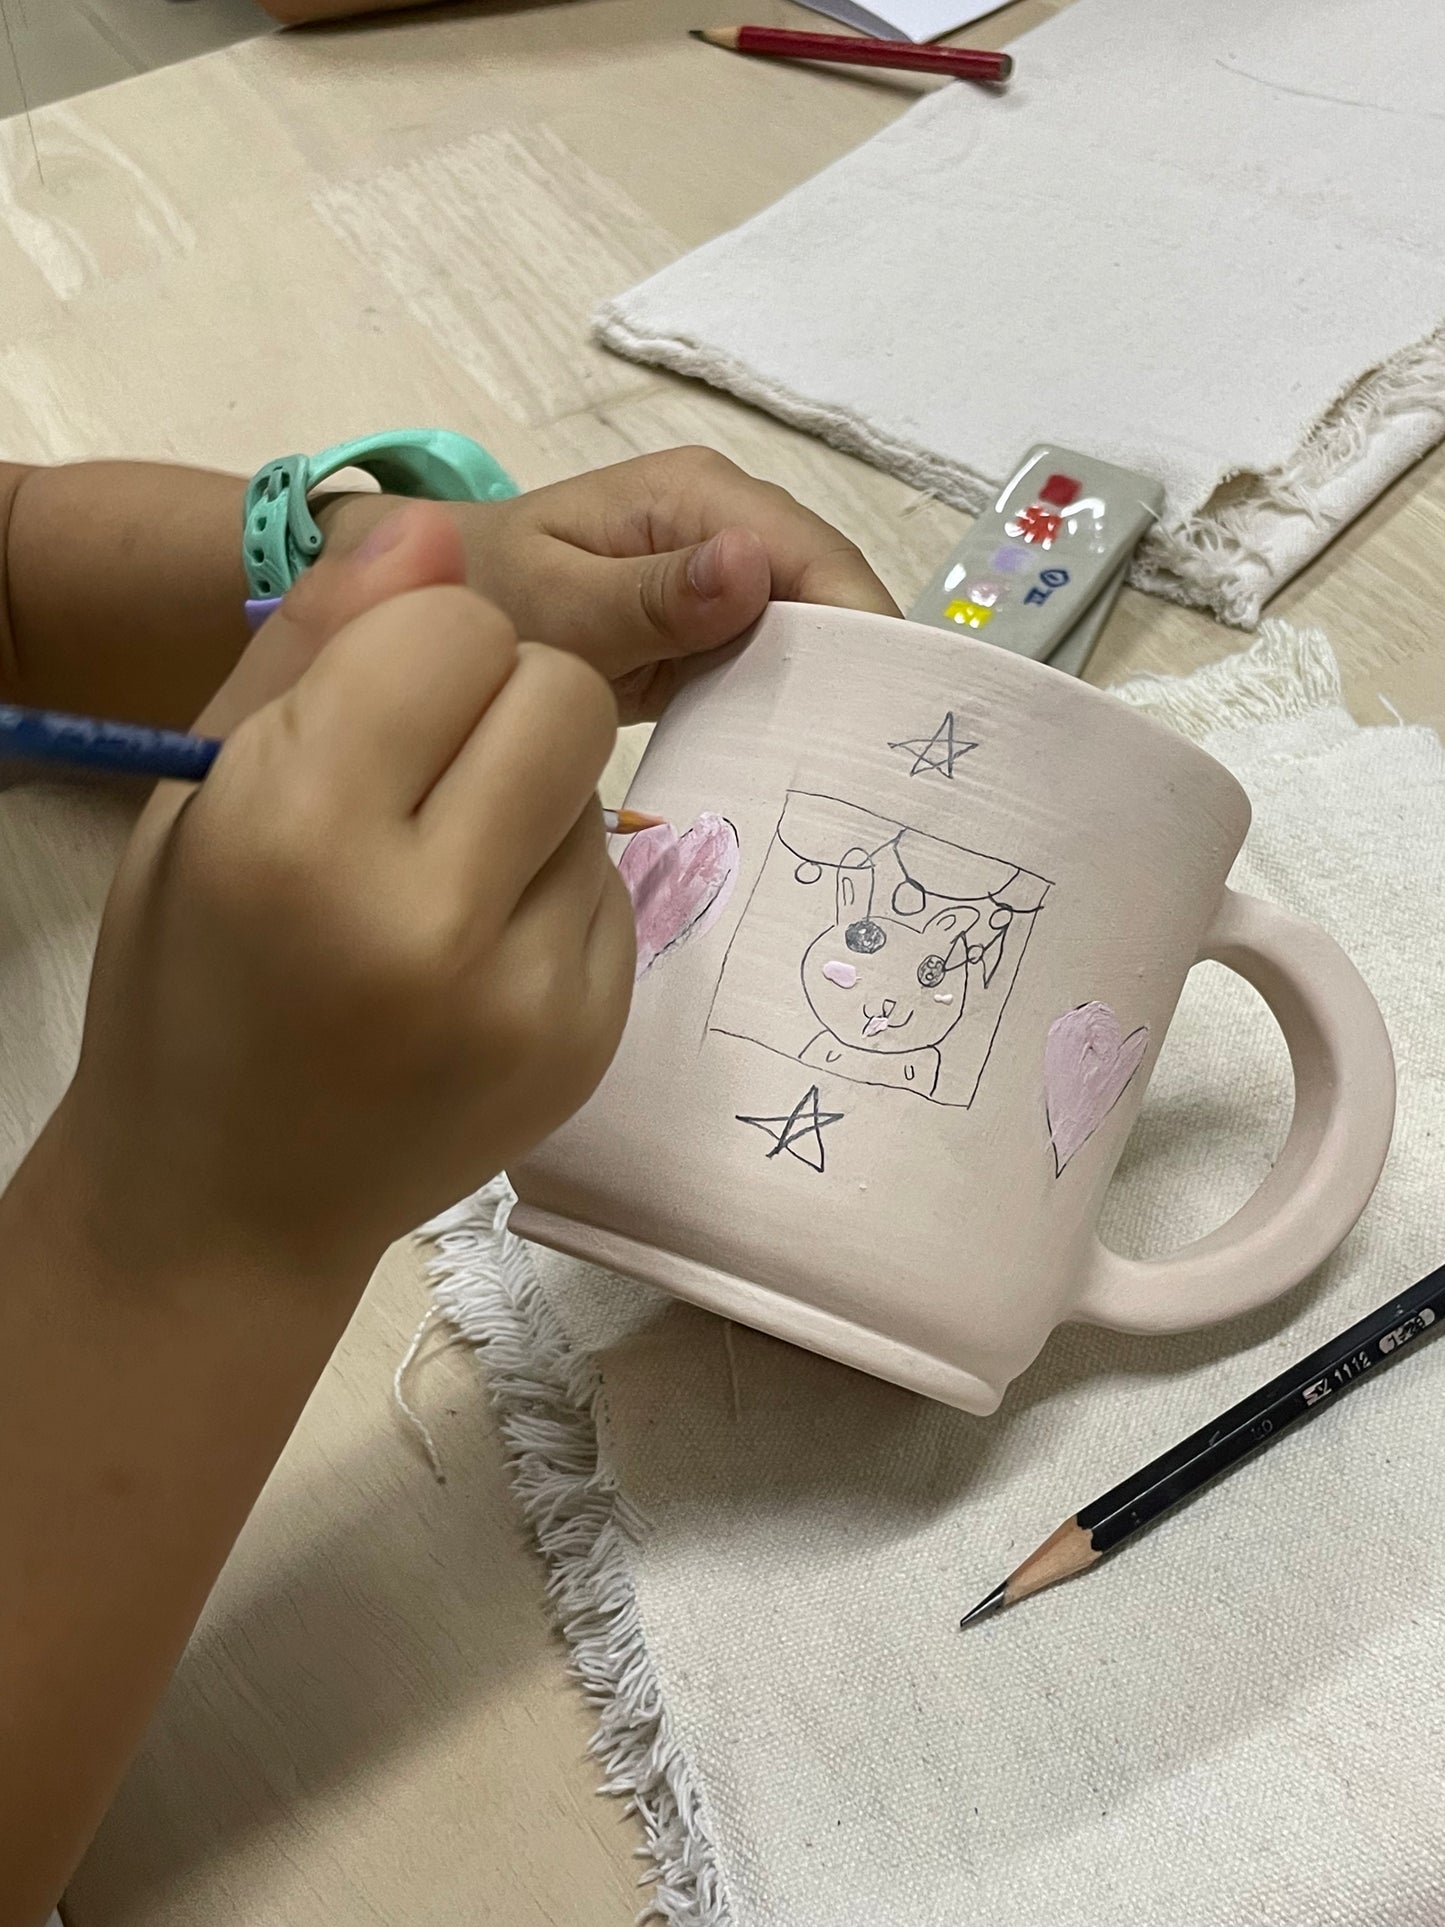 POTTERY PAINTING CLASS